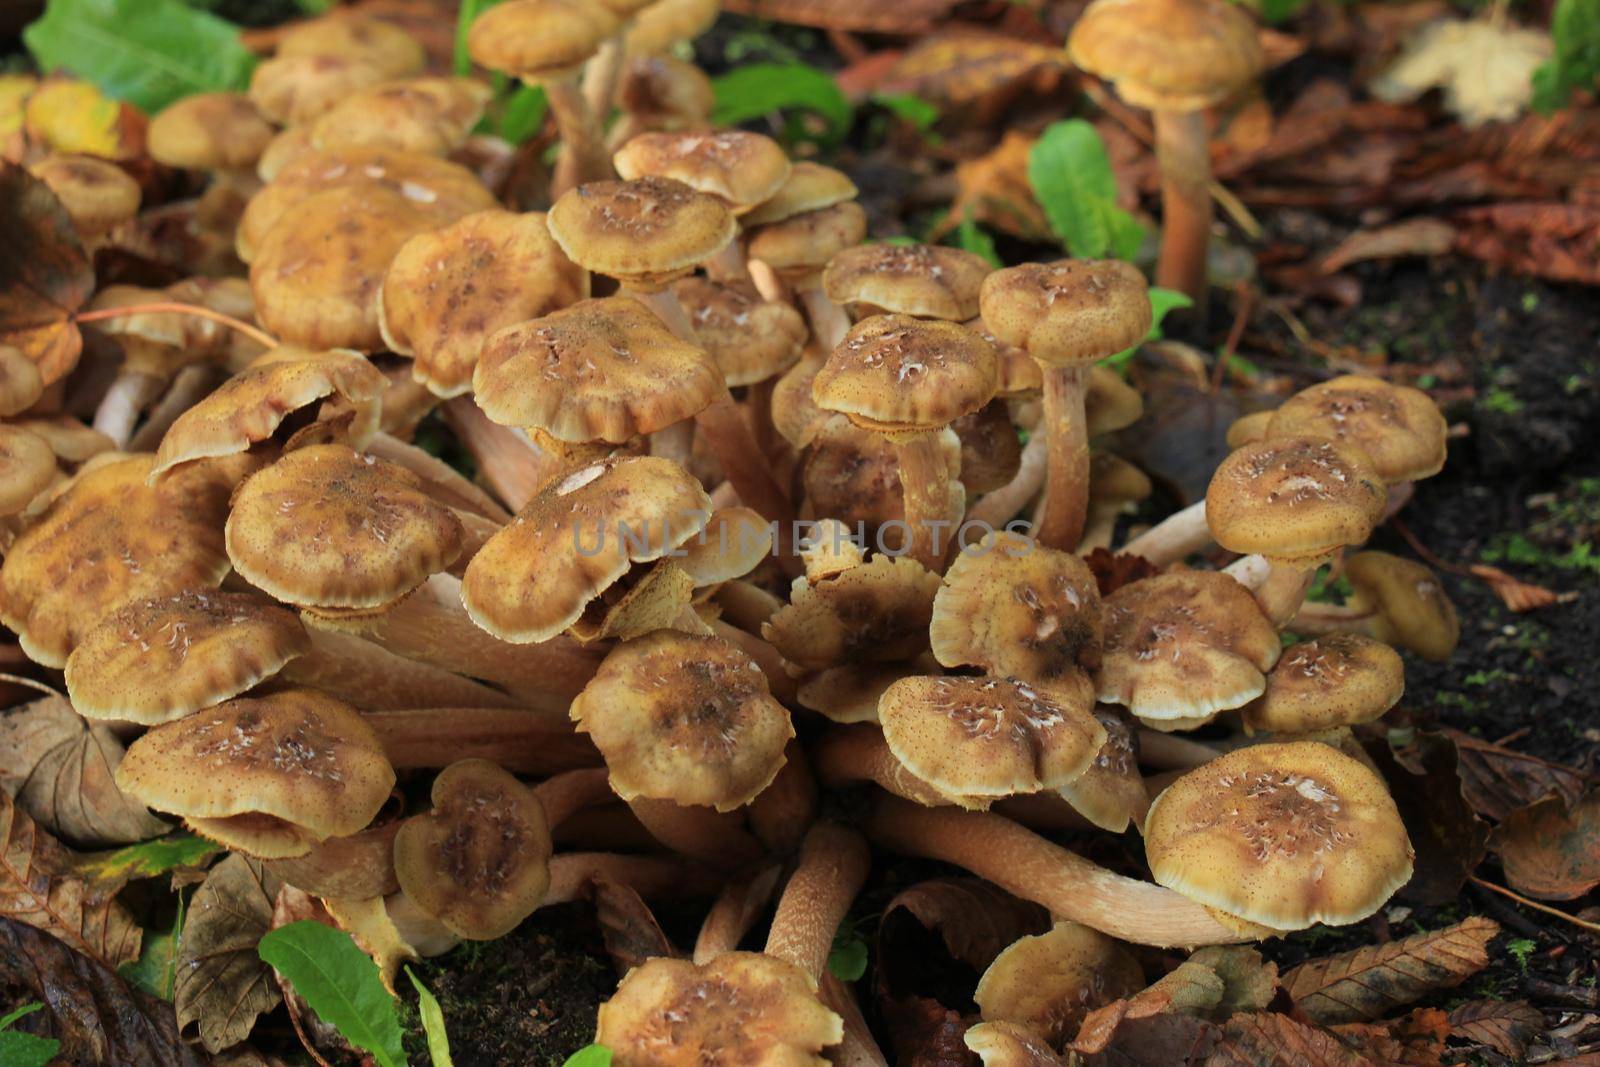 A group of mushrooms in a fall forest